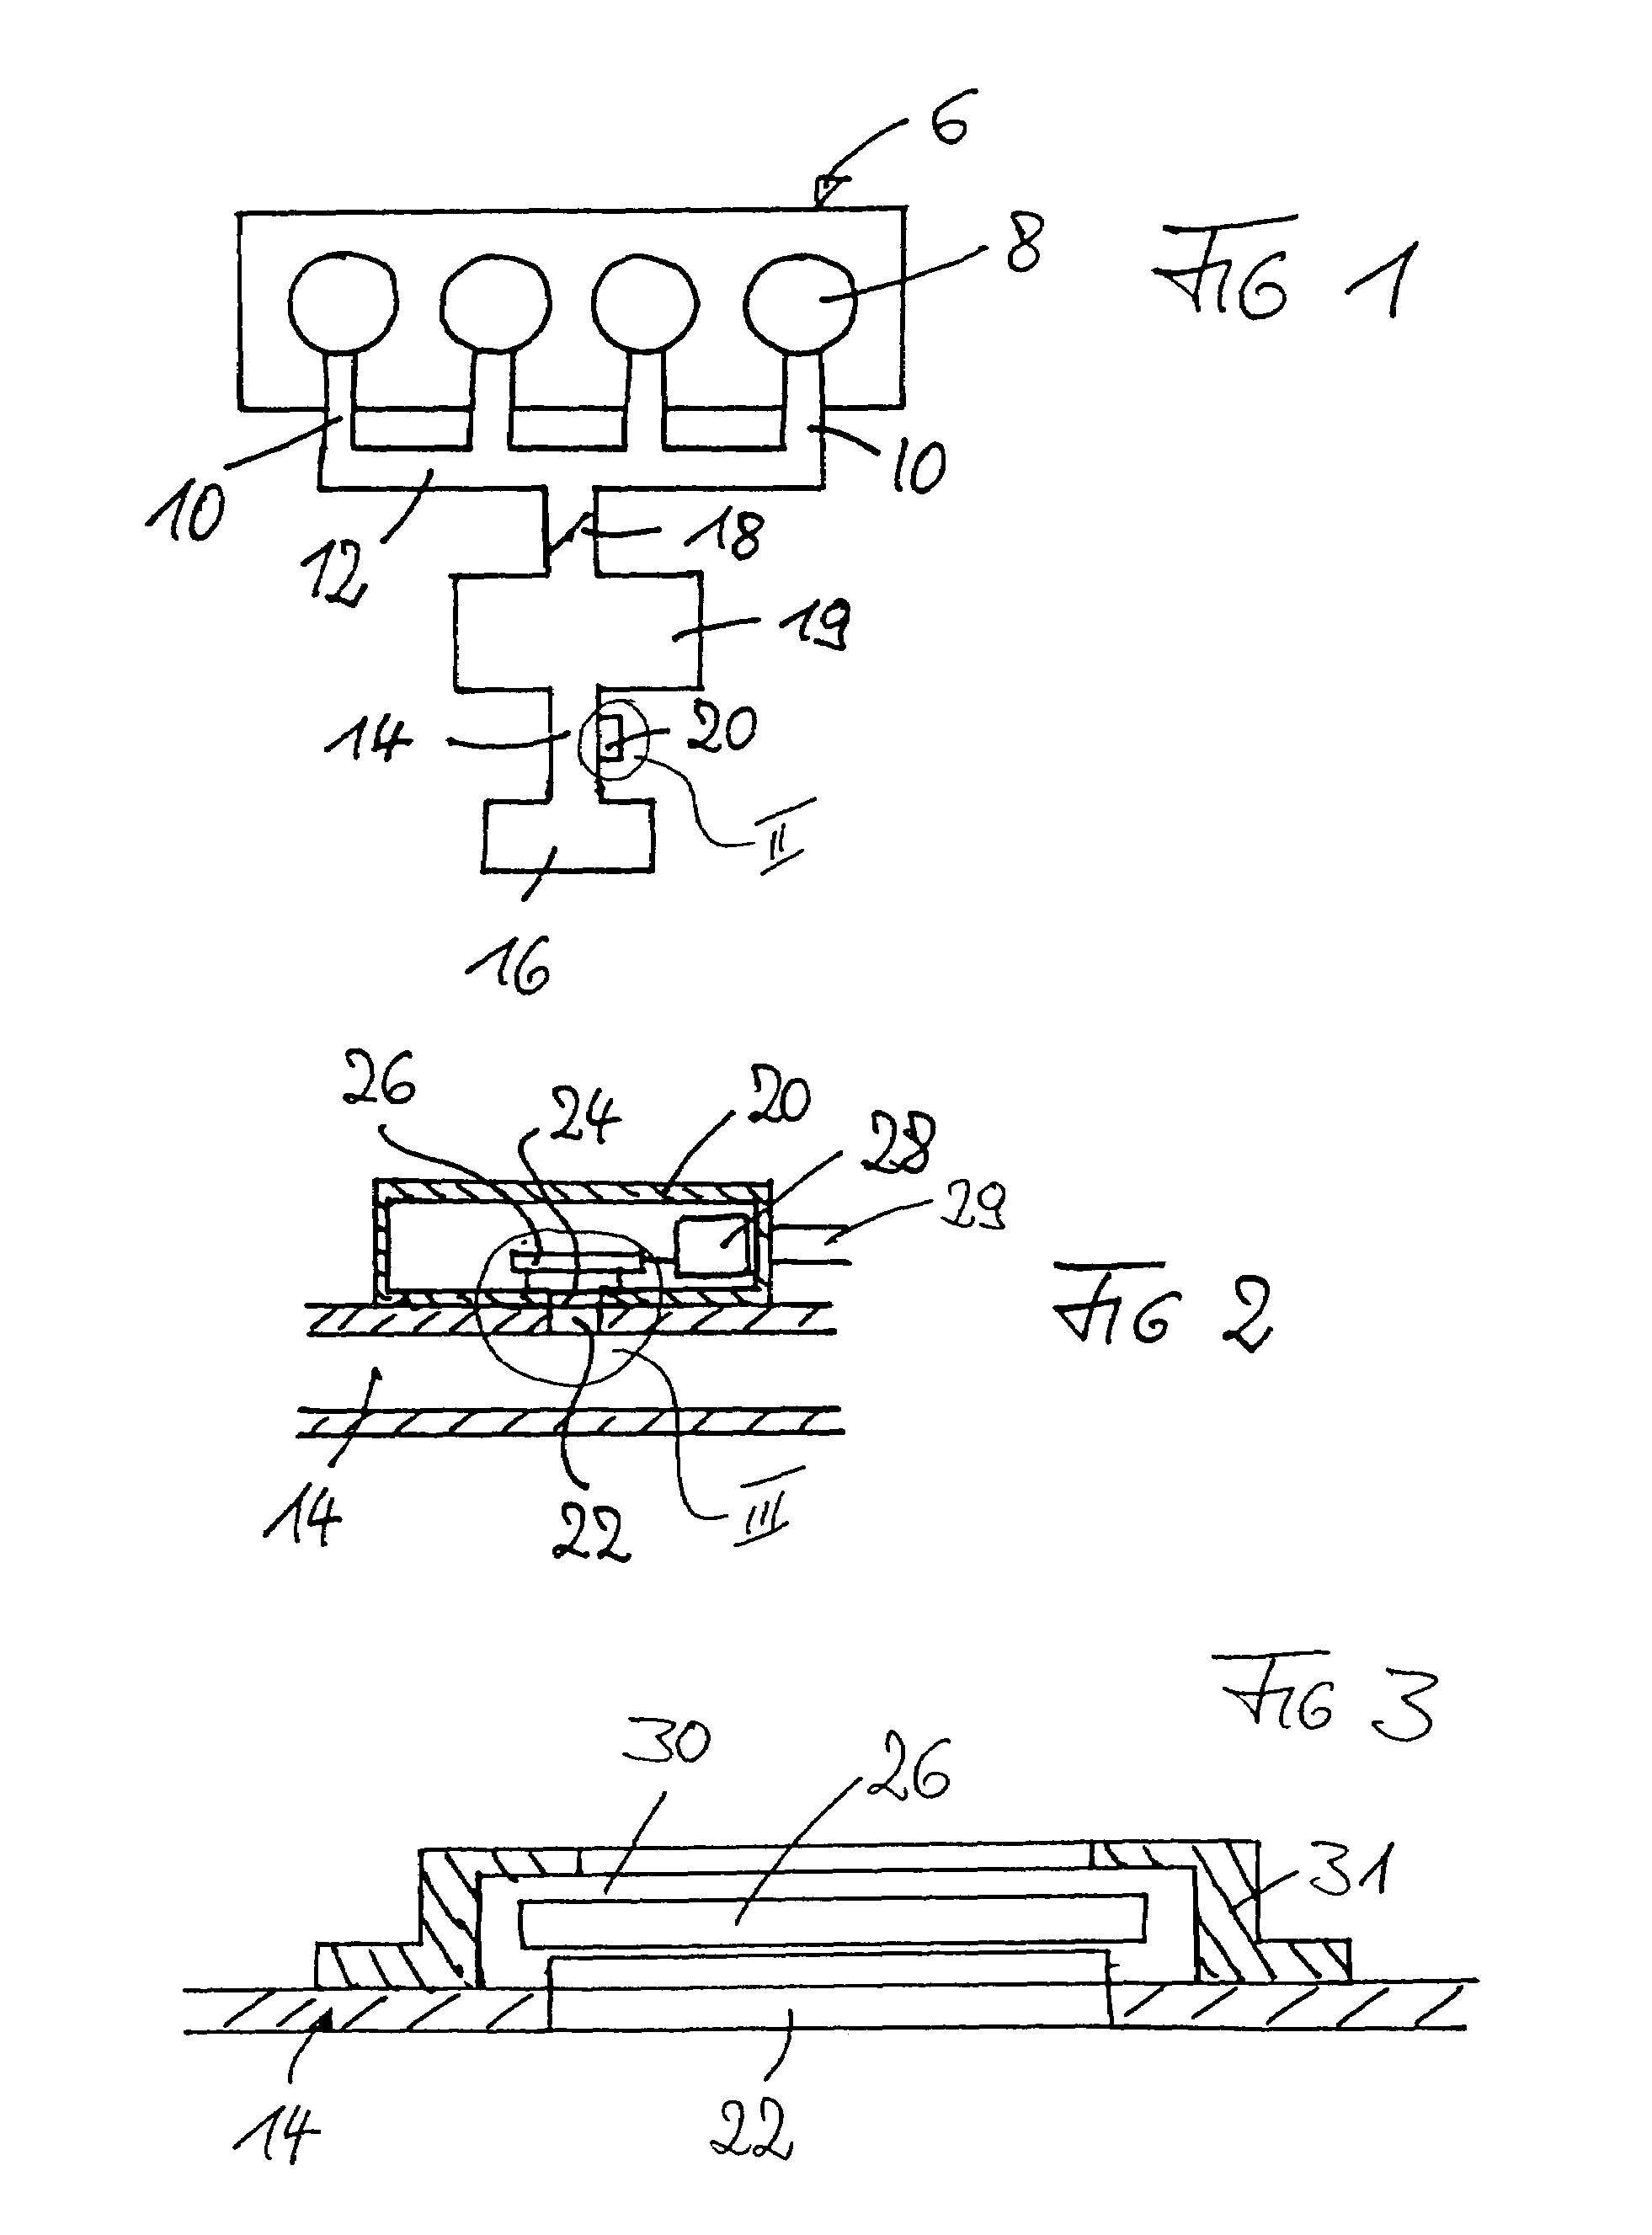 Method and apparatus for producing sounds that depend on the operation of an internal combustion engine in the interior space of a motor vehicle